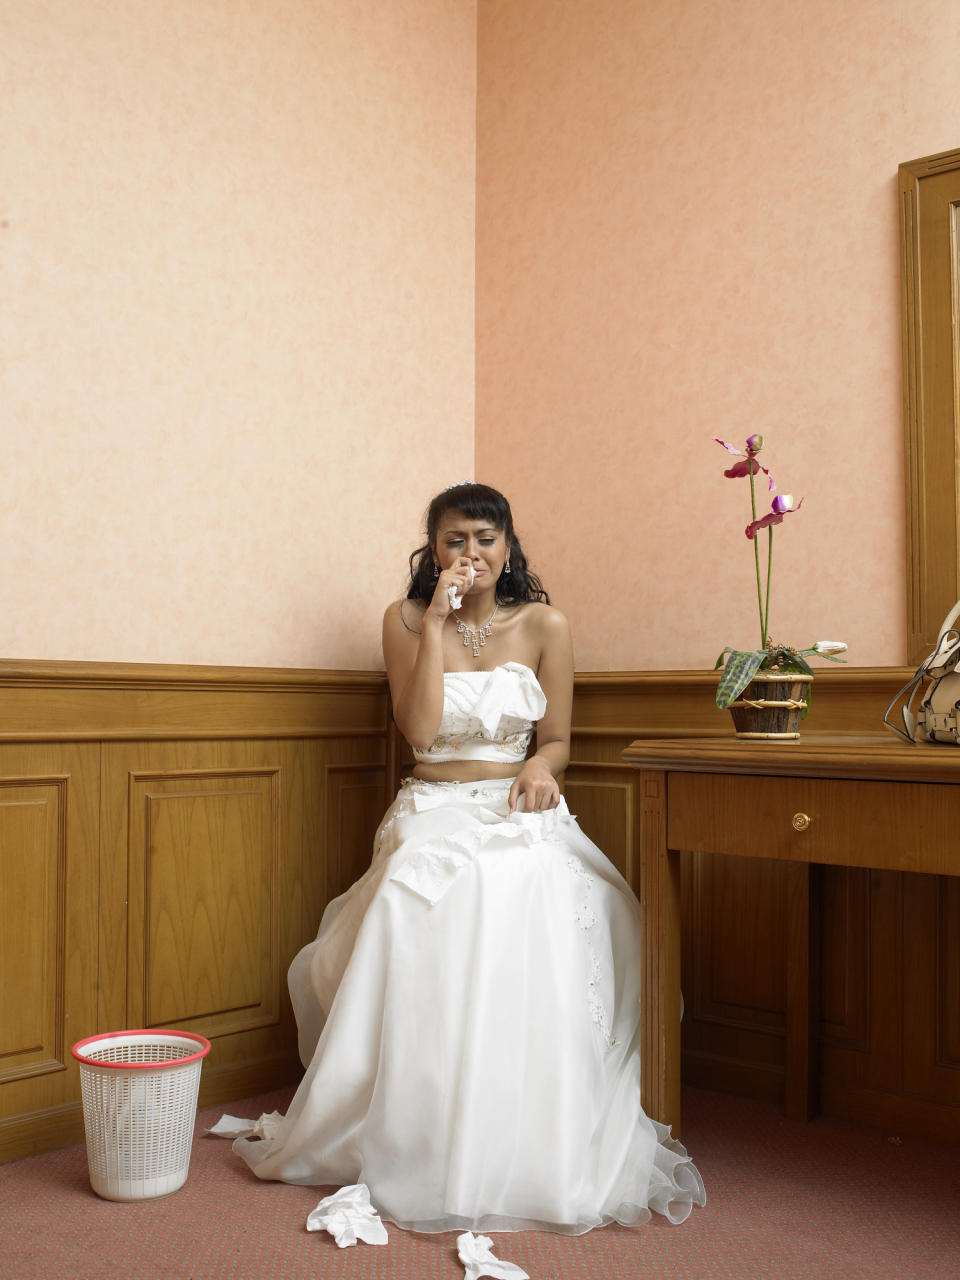 Bride sitting, emotional, in a white wedding dress, tissue in hand, indoors with simple decor